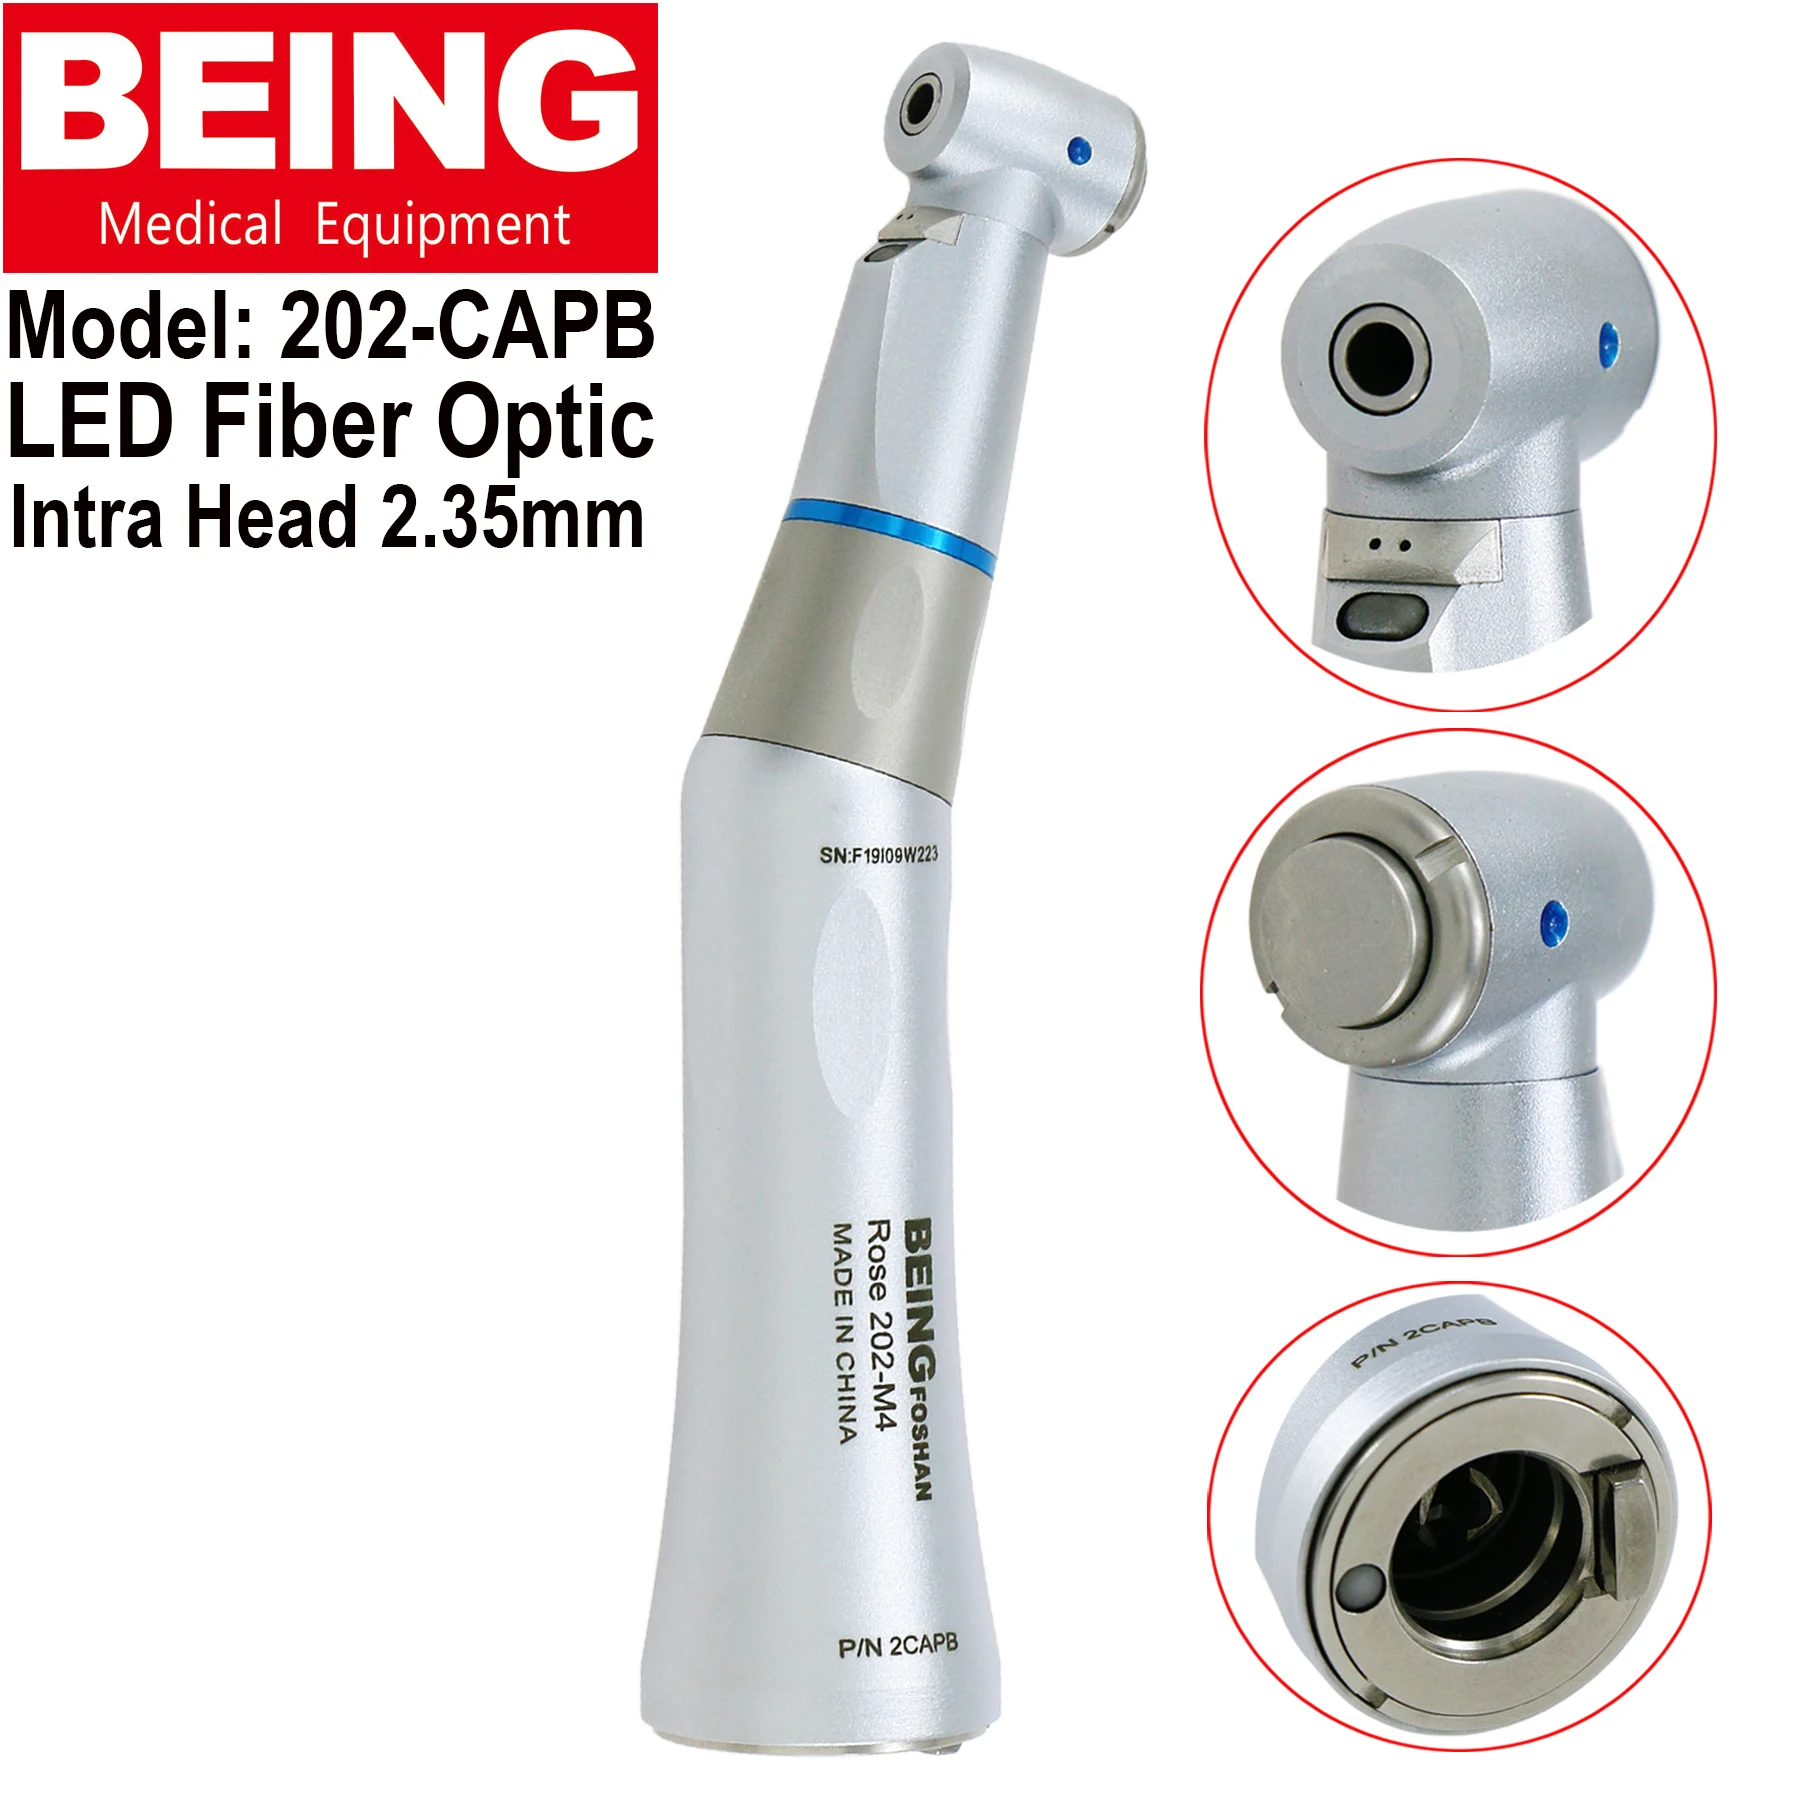 BEING Dental 1:1 Fiber Optic LED Low Speed Inner Water Contra Angle Handpiece Rose 202CAPB Latch Bur 2.35mm KAVO Intra Head NSK